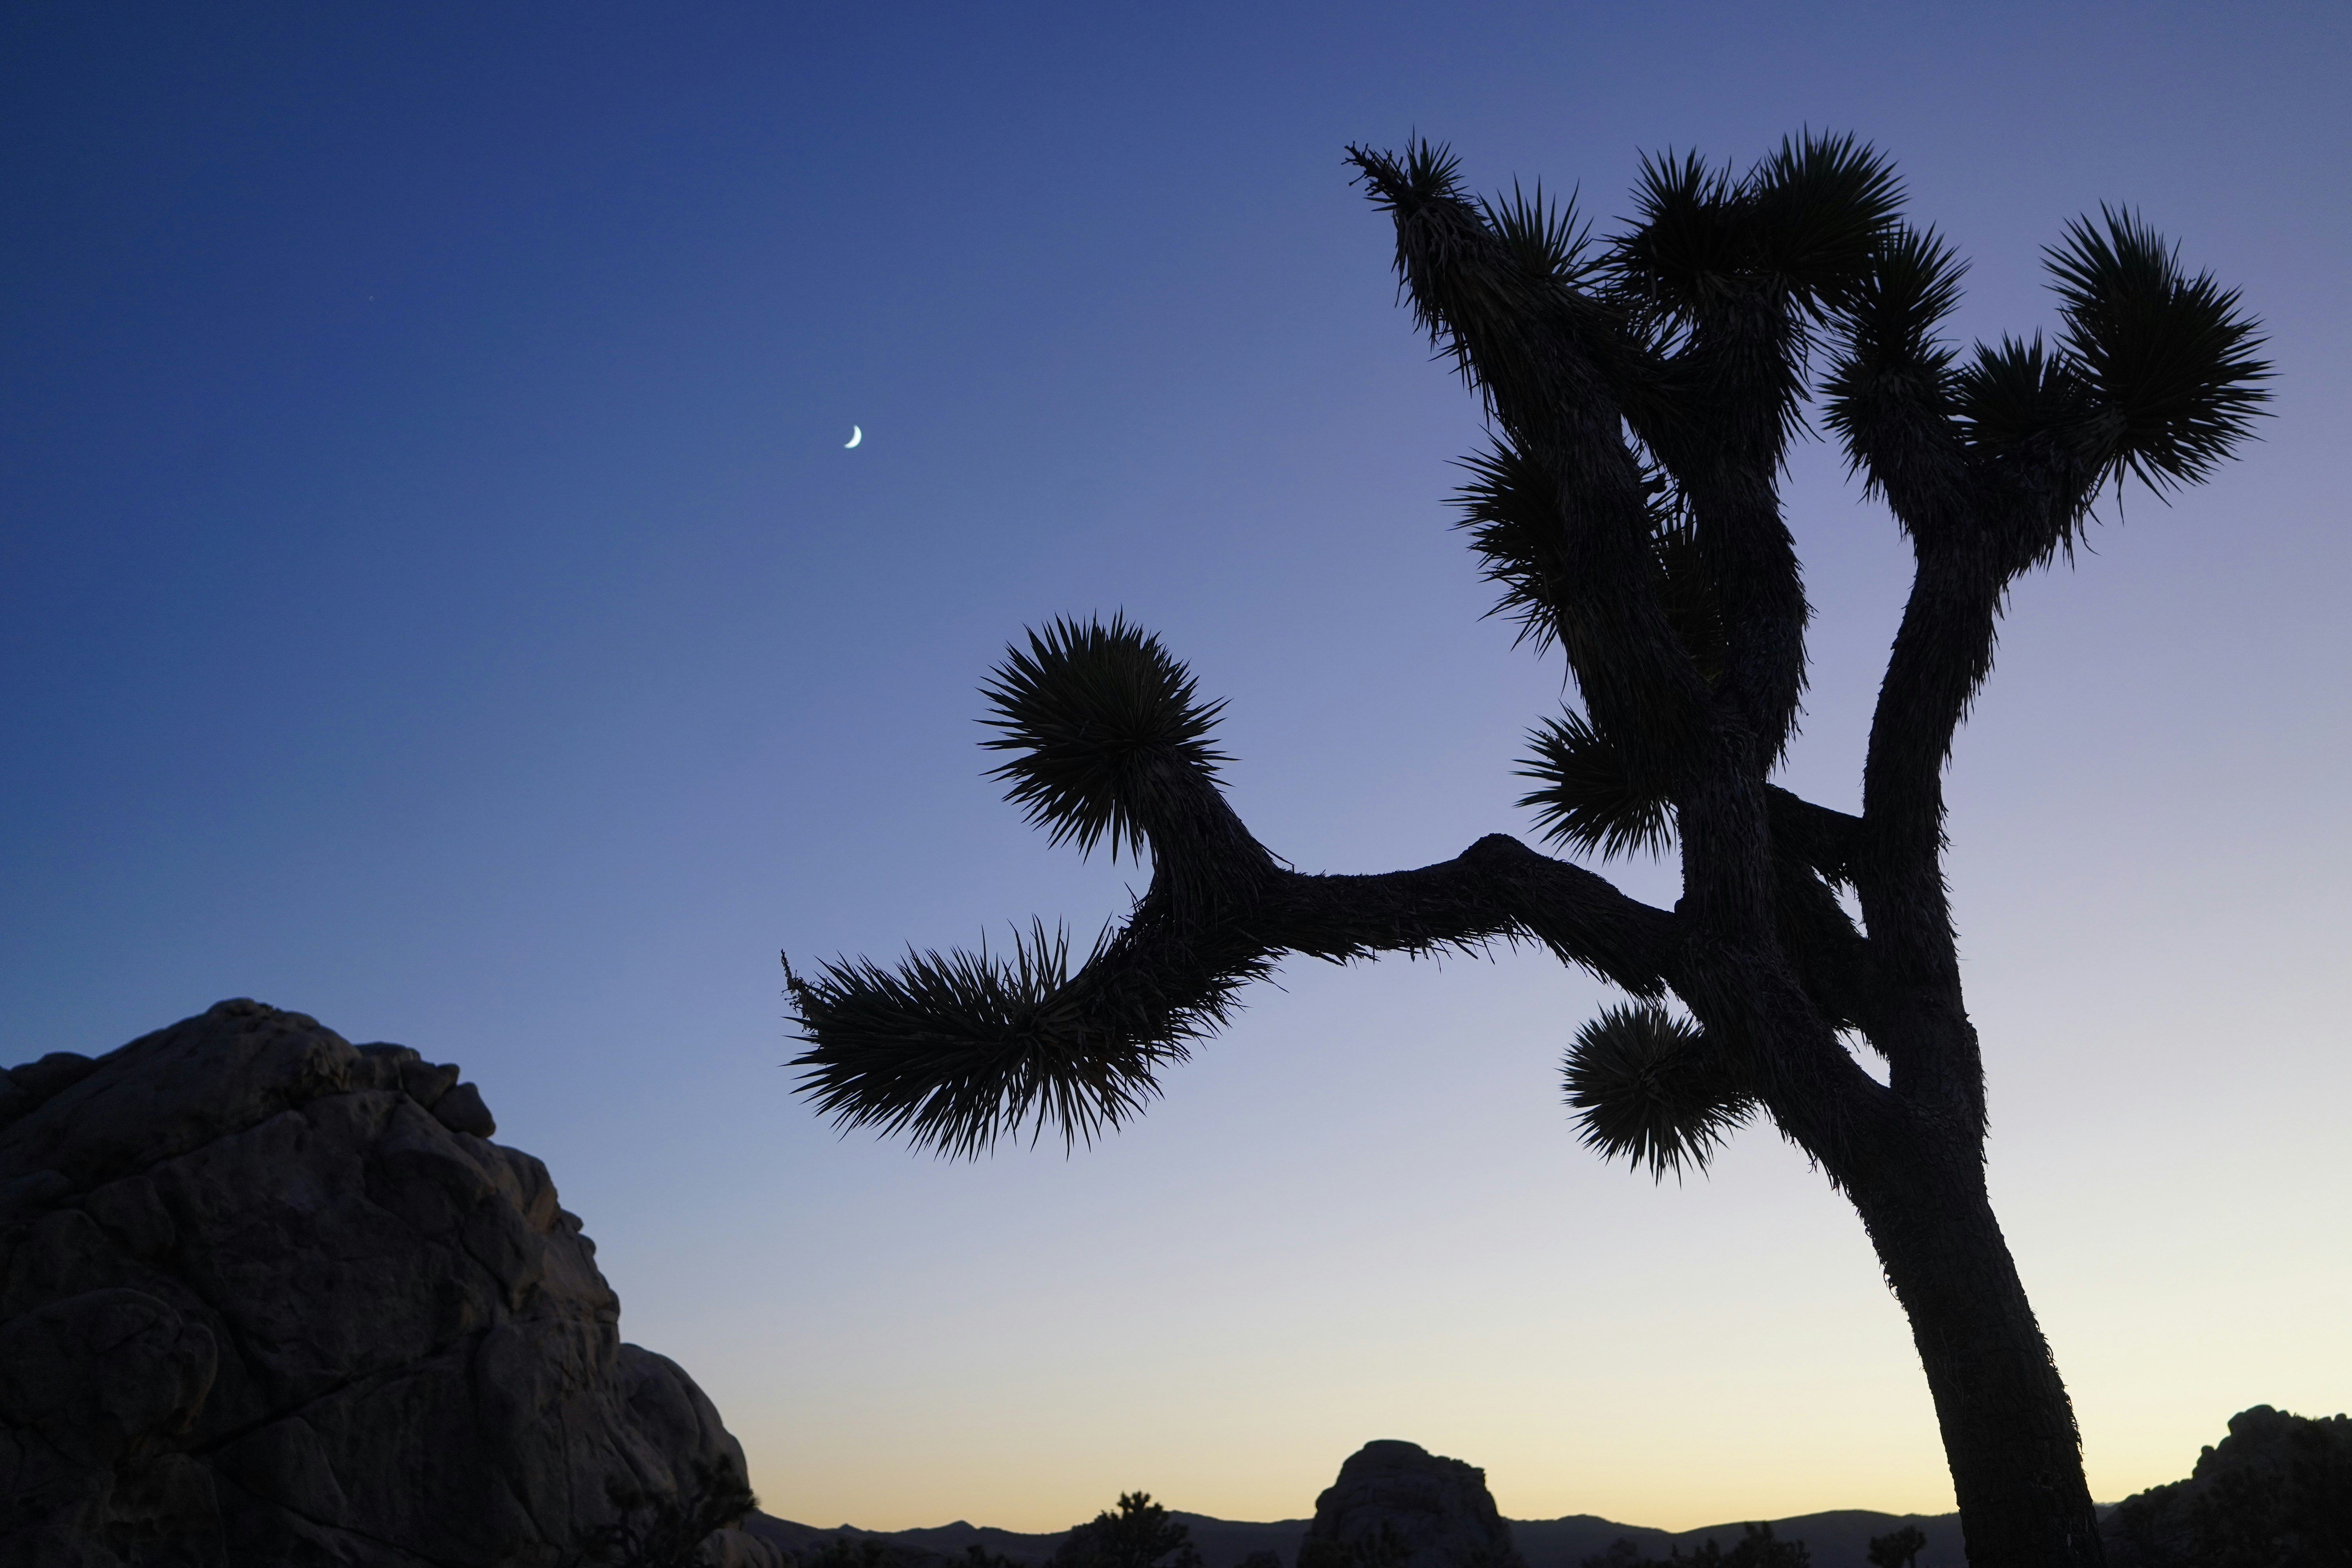 The black silhouette of a Joshua tree stands against a twilight sky that gradients from blue to yellow, with large rocks framing the tree in the composition